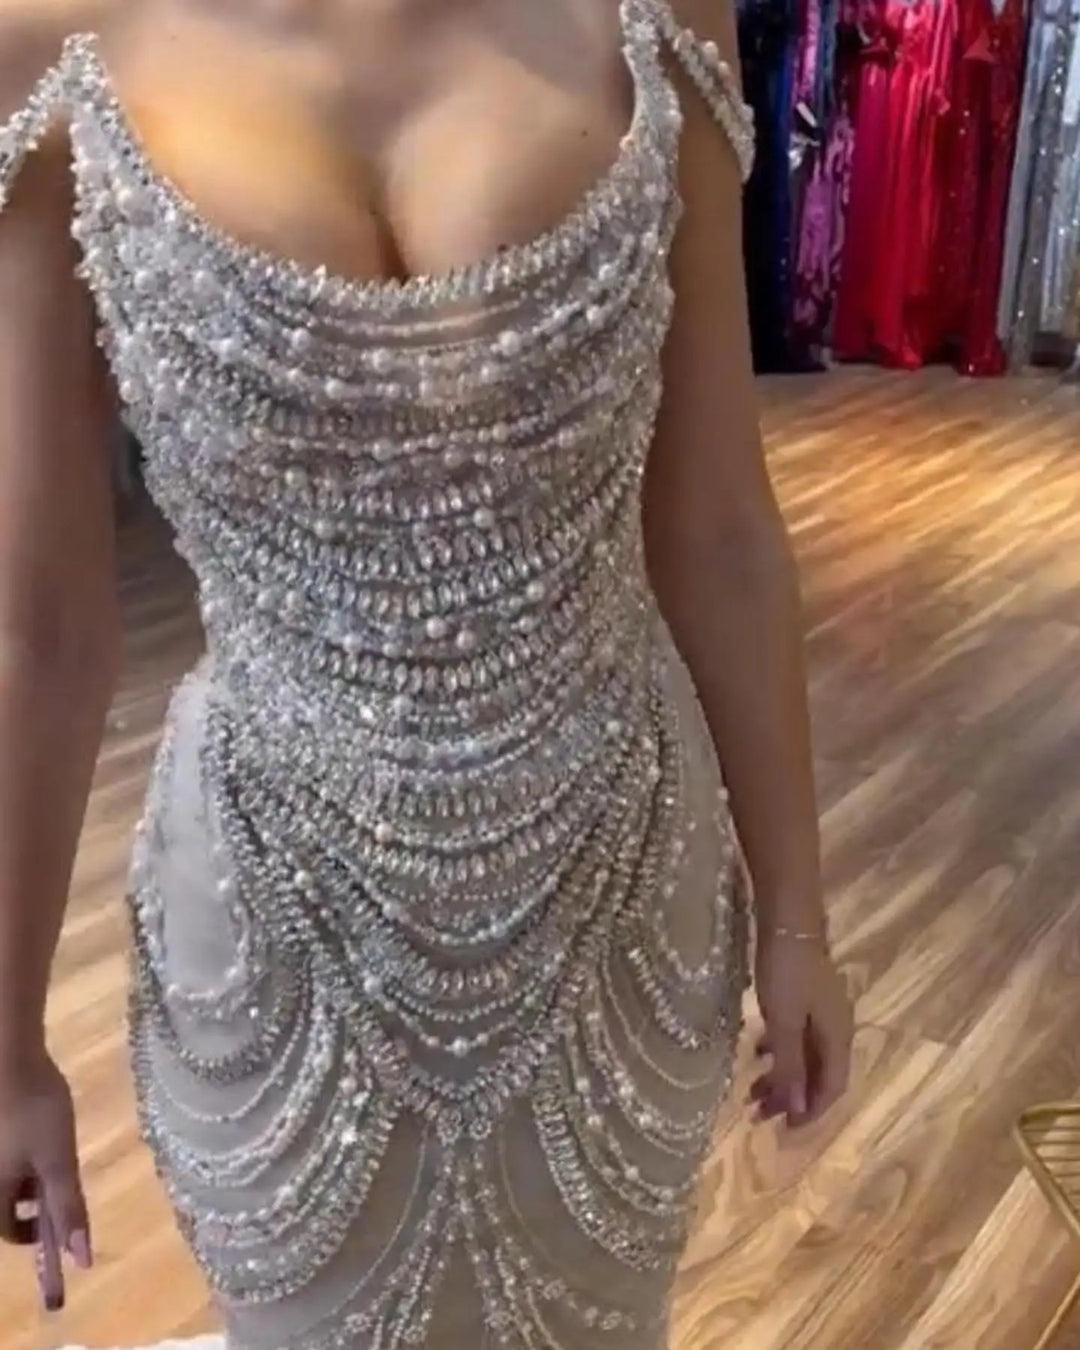 Dreamy Vow Luxury Crystal Silver Gray Mermaid Dubai Evening Dresses for Women Wedding Long Black Girls Prom Party Gowns SS403